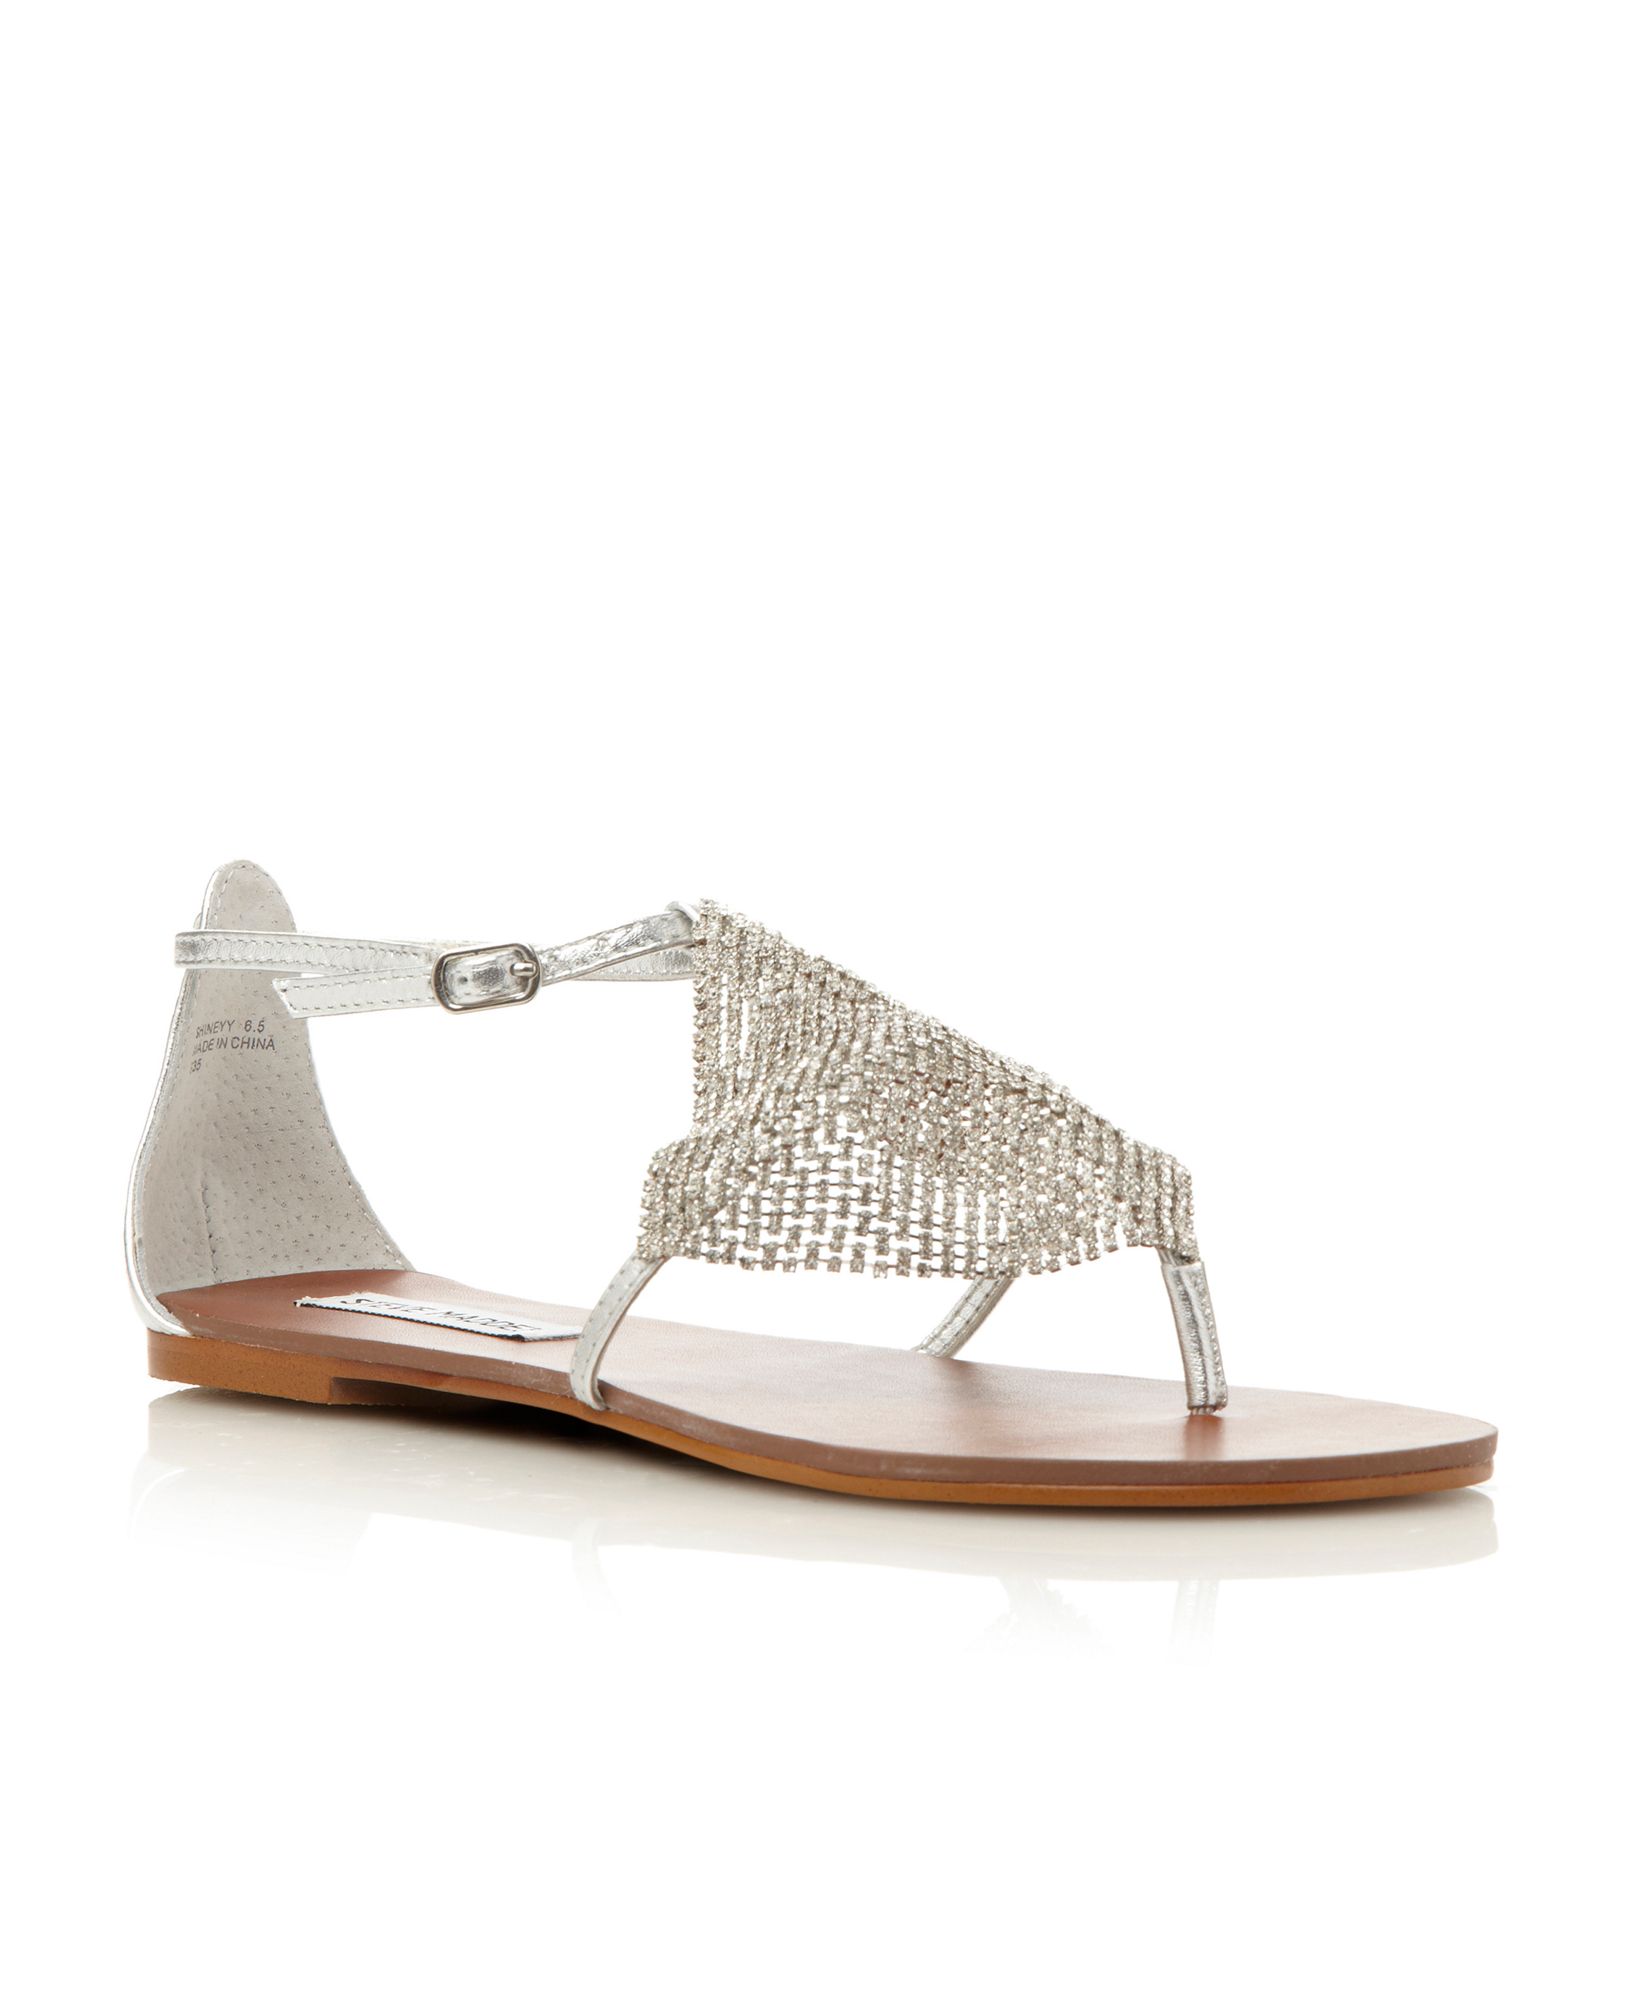 Steve Madden Shineyy Diamante Toe Thong Flat Sandals in Silver ...